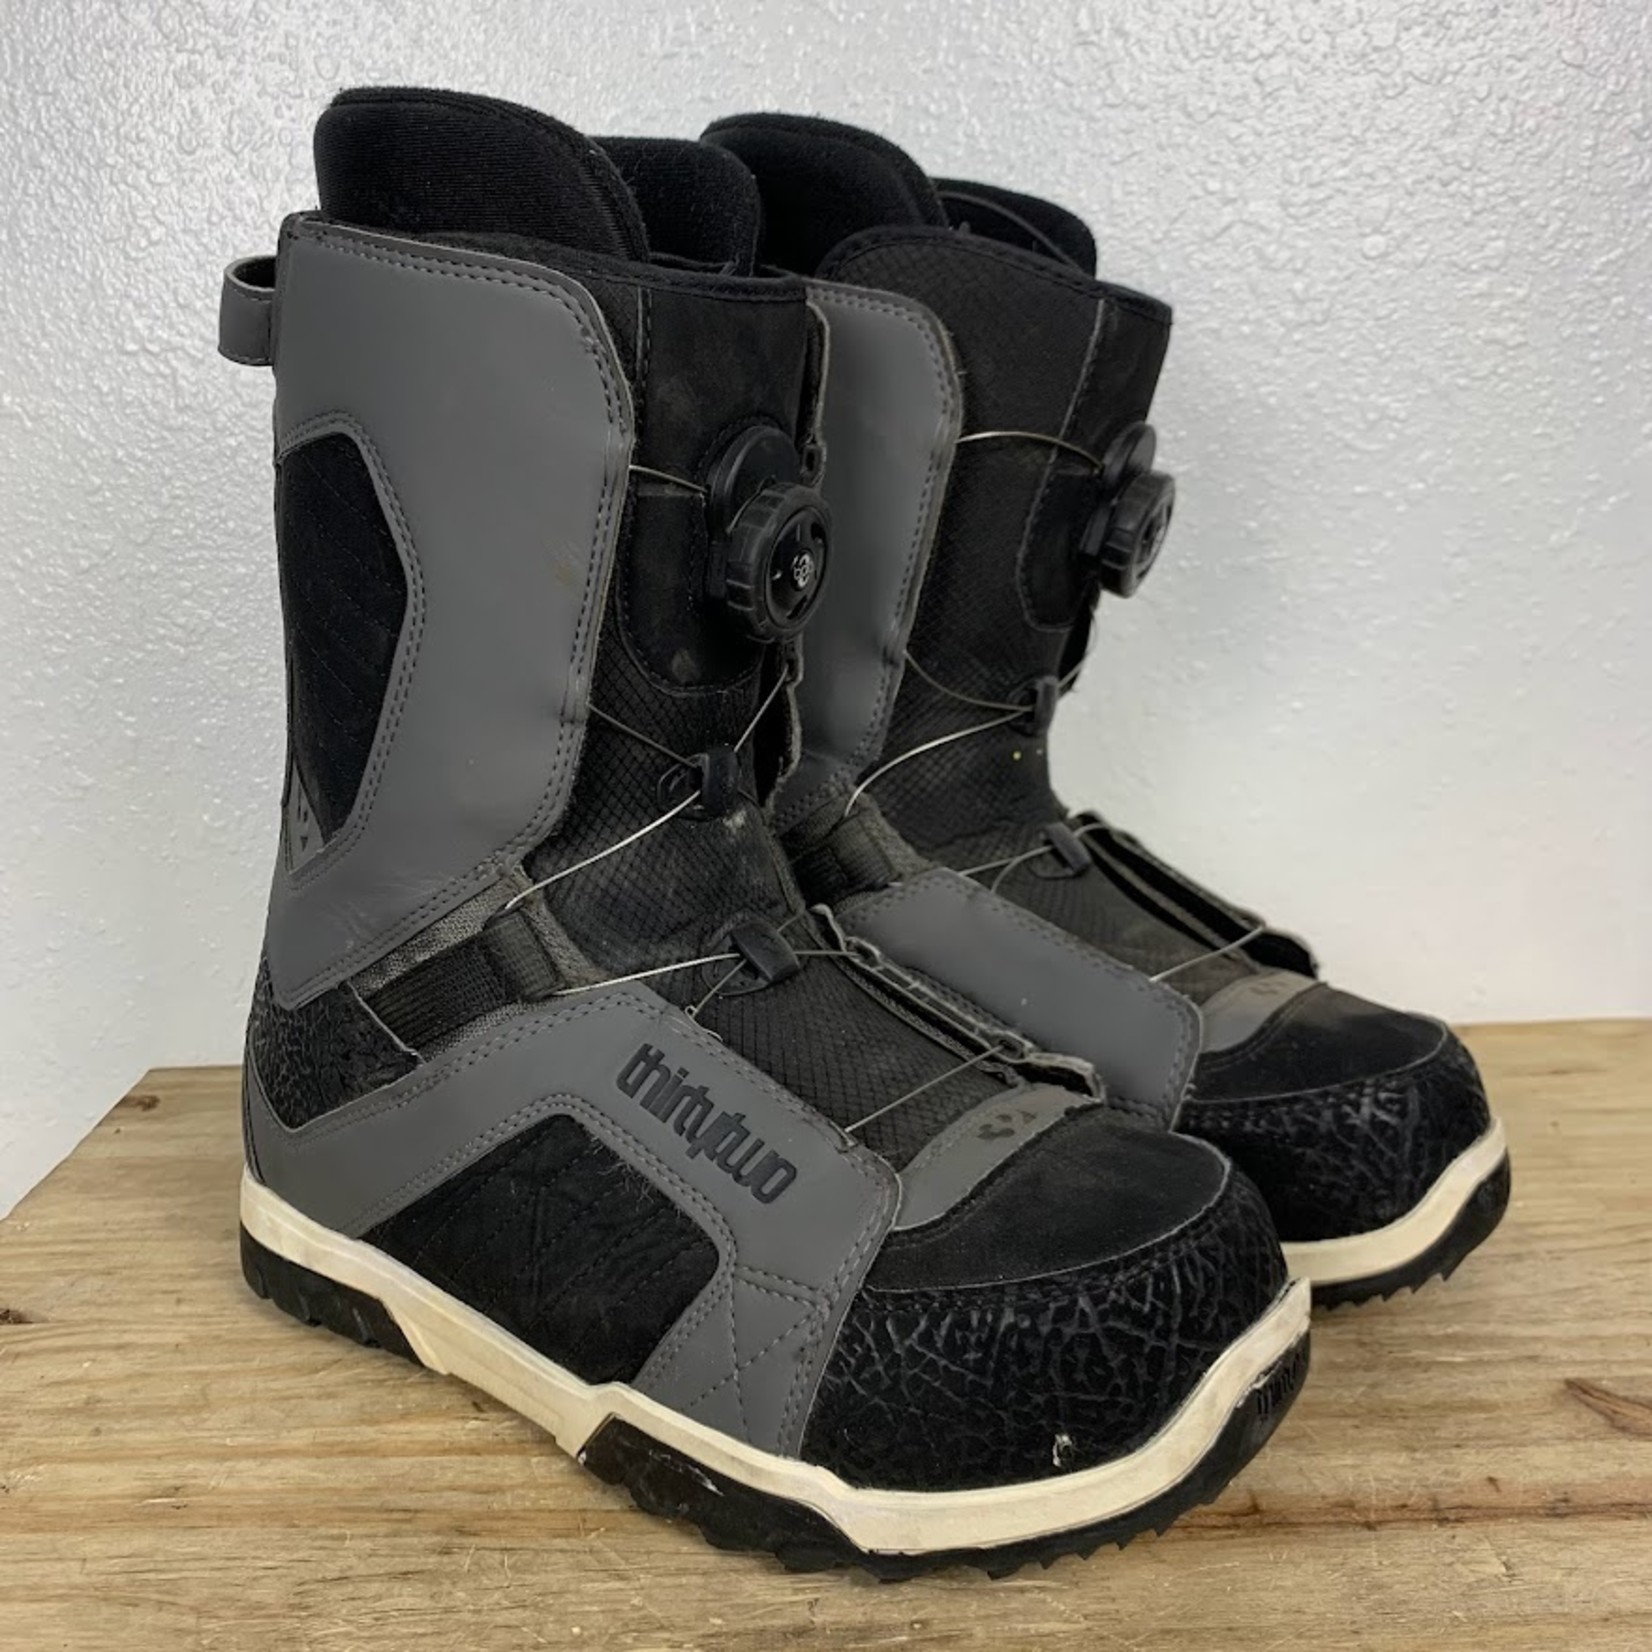 ThirtyTwo STW Snowboard Boots, Size 11